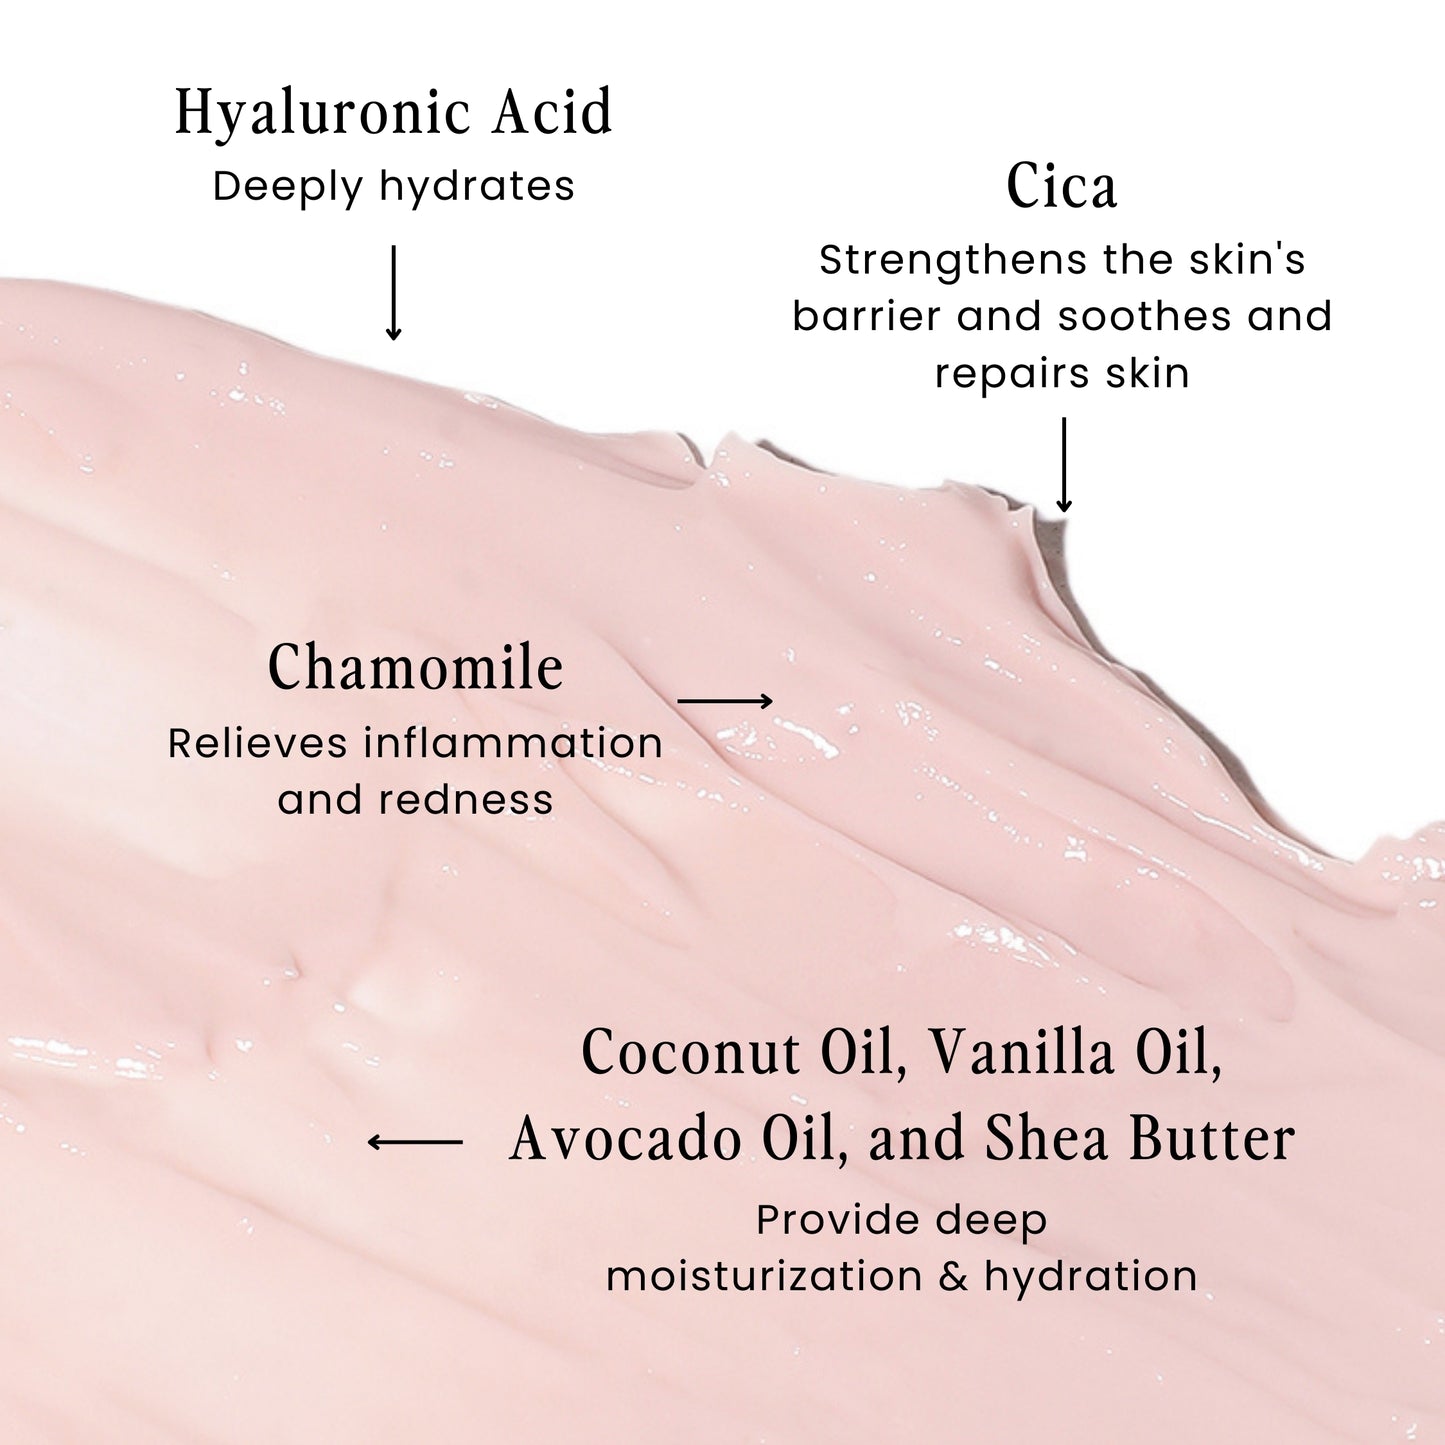 Body cream texture with ingredients mentioned such as Vanilla Oil, Shea Butter, Hyaluronic Acid, Cica, Chamomile